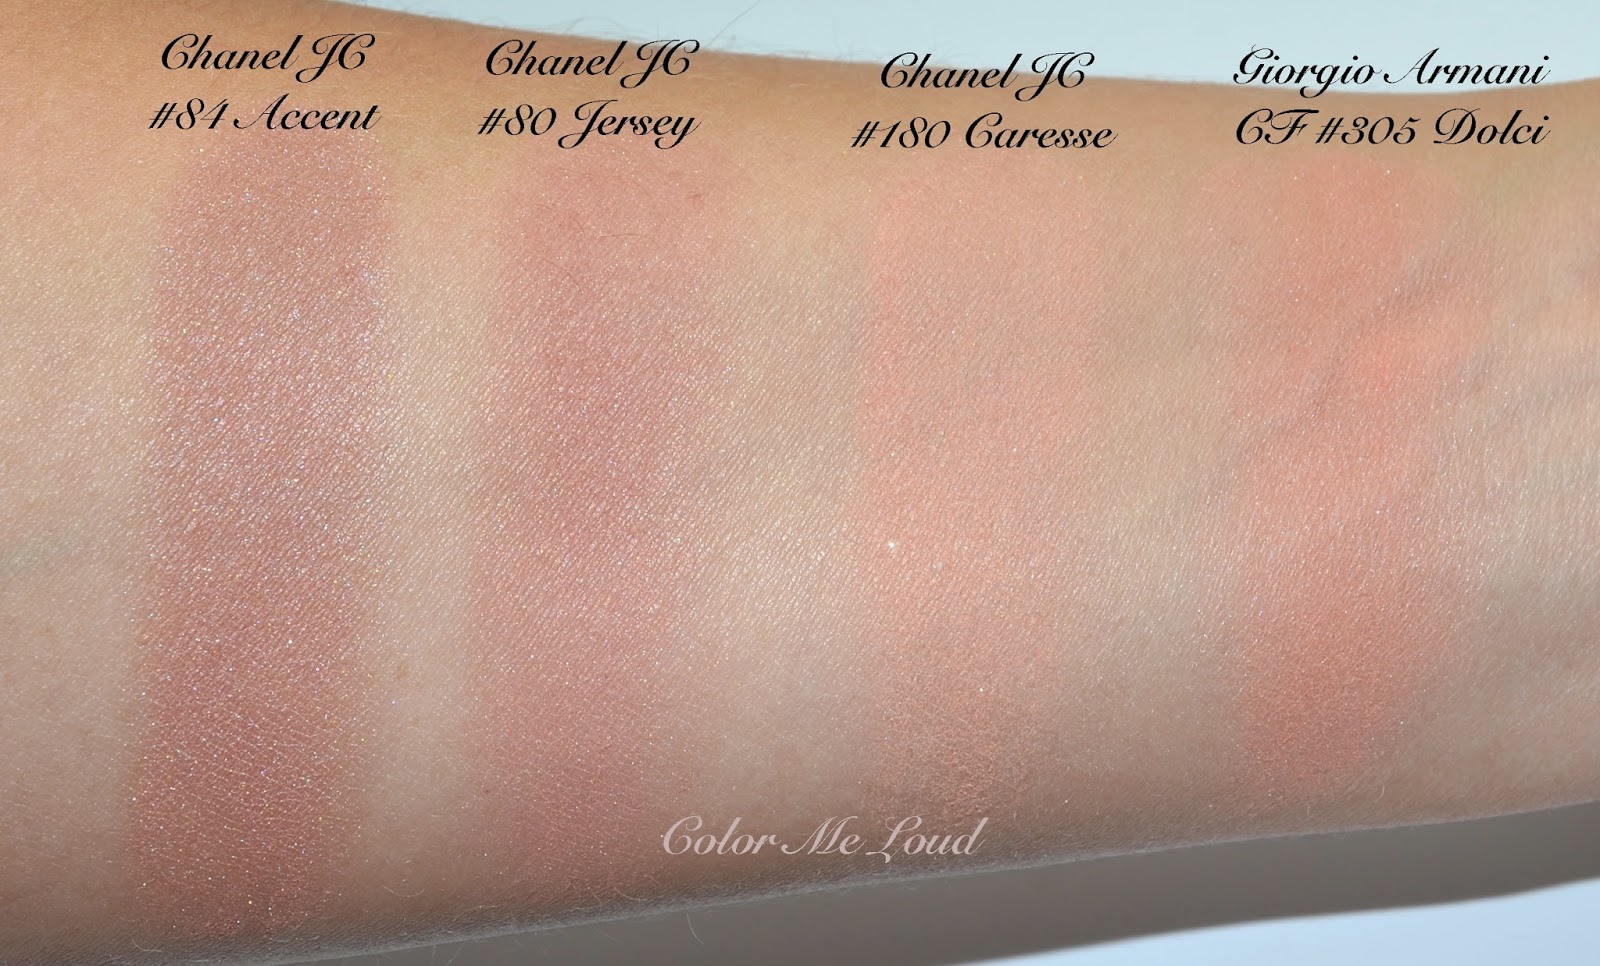 Chanel Joues Contraste #180 Caresse for Plumes Précieuses Holiday 2014  Collection, Review, Swatch, Comparison & FOTD